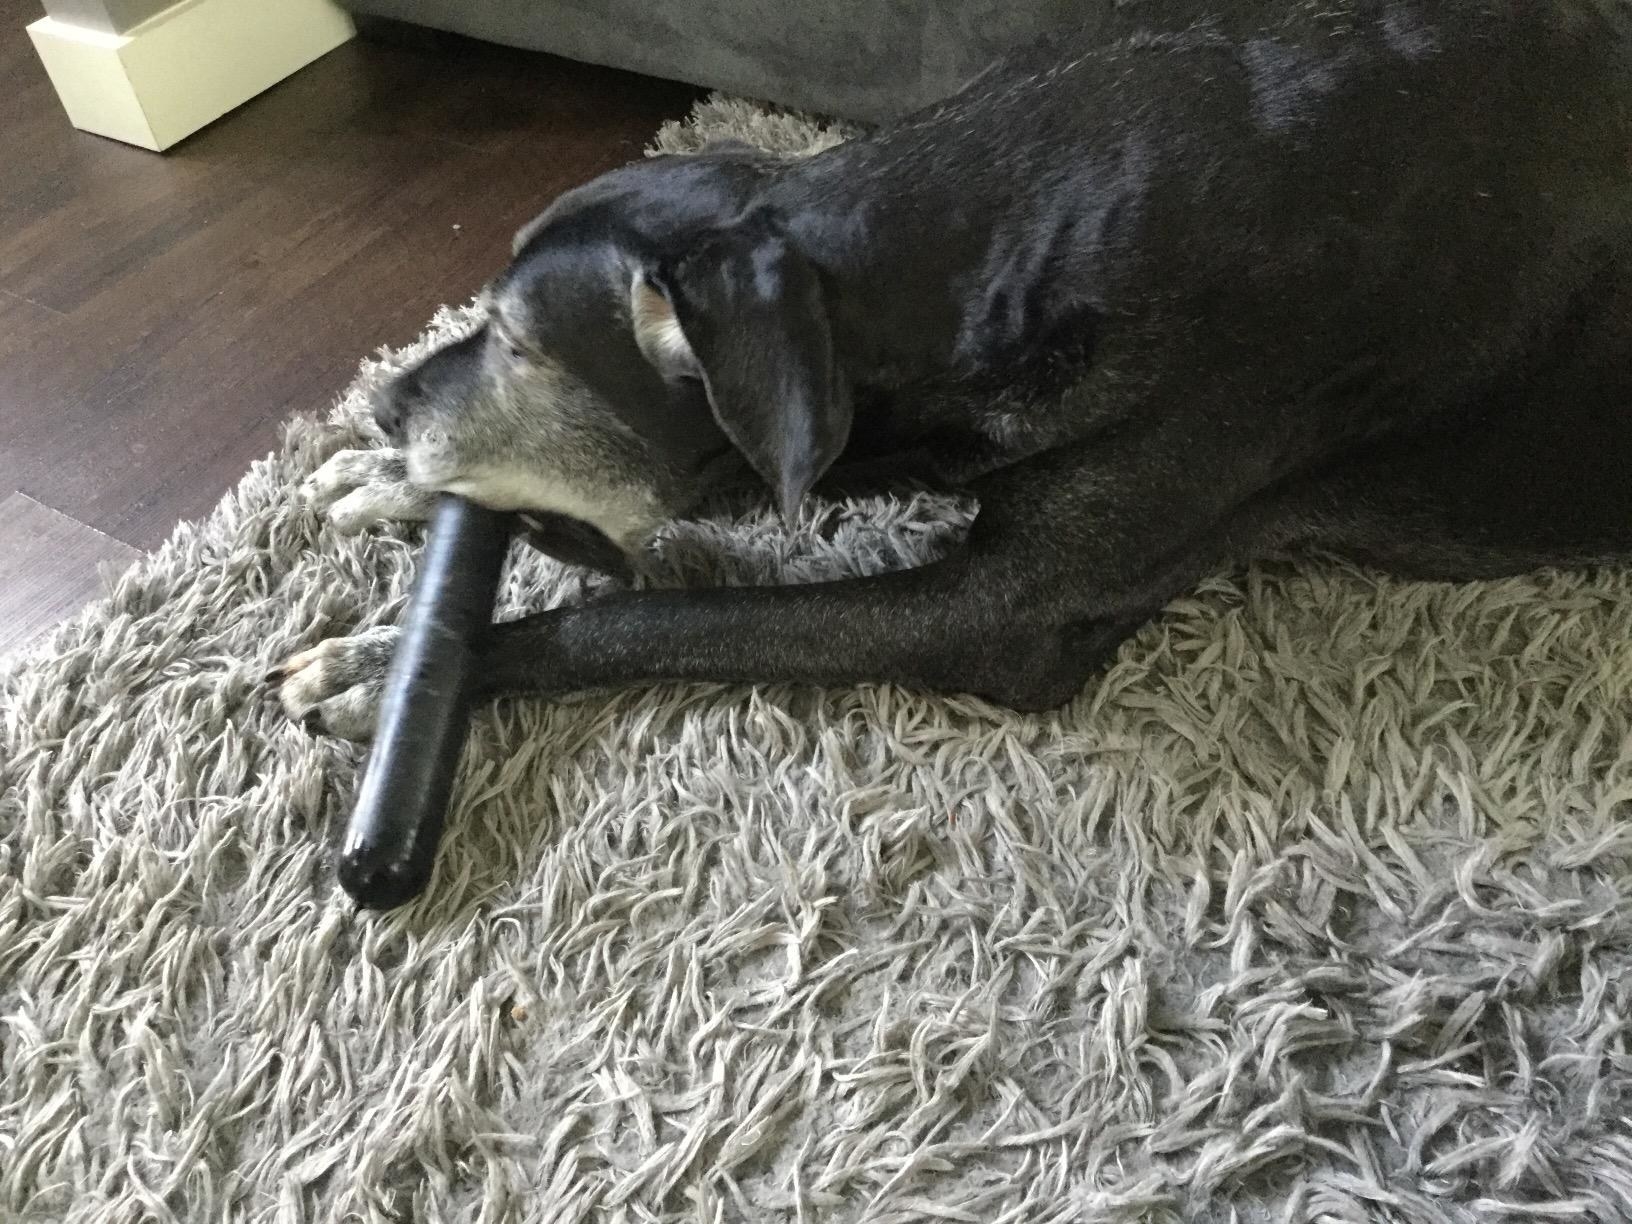 A Great Dane chews on the toy, which is a rubbery rod with rounded ends